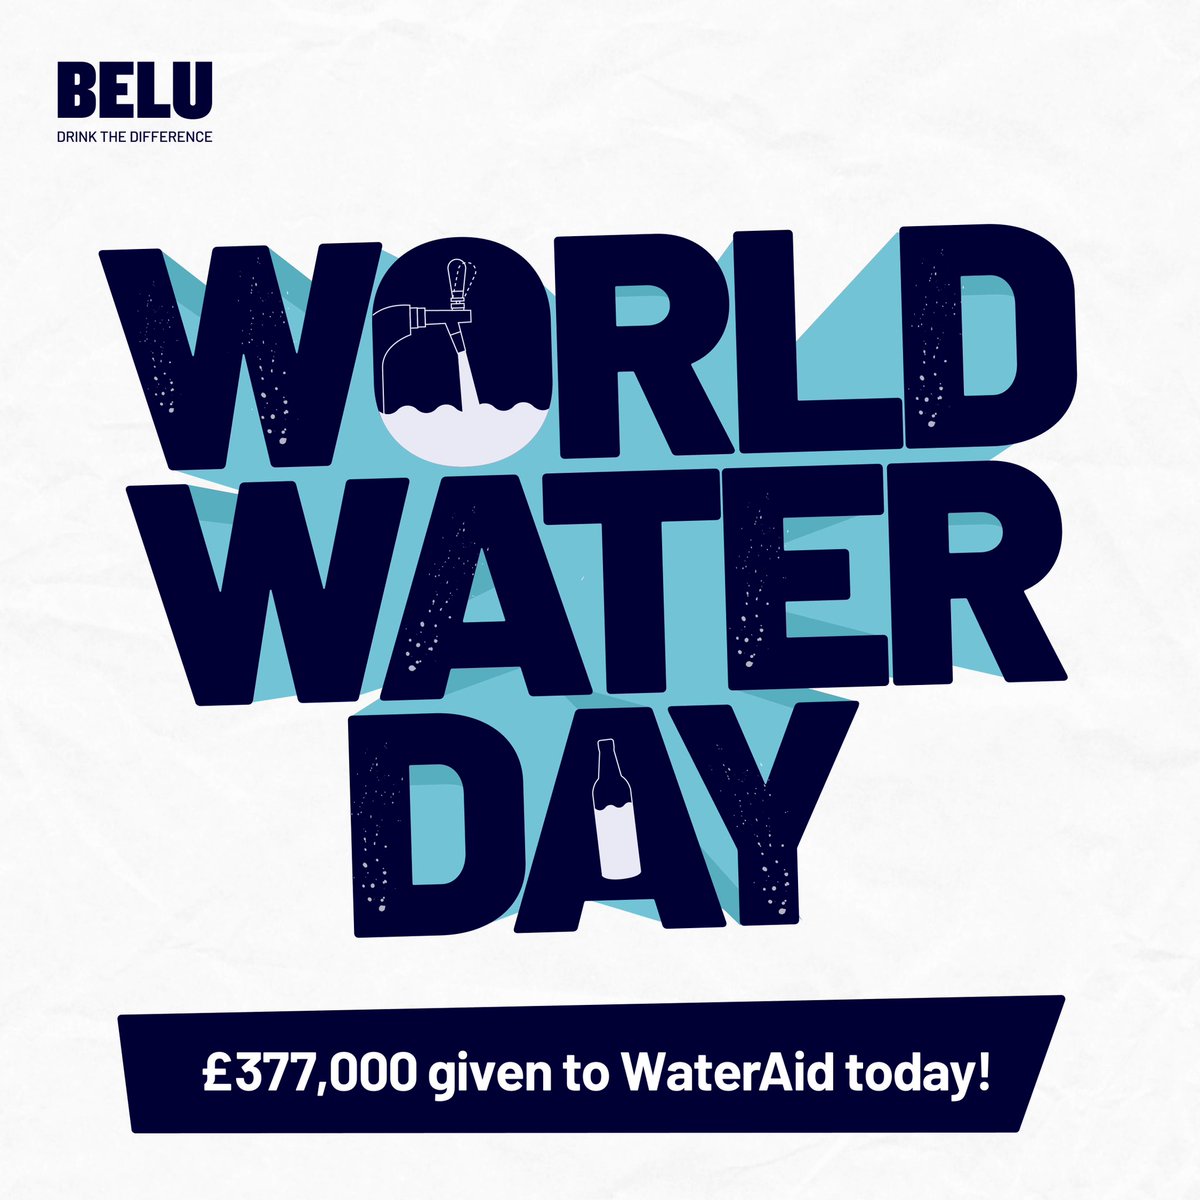 Today is World Water Day, and we're paying tribute to our amazing customer, @BeluWater. What an impact they make all across the globe - working with Water Aid to supply clean water where it's needed most. Together, we're changing the way the world sees water.